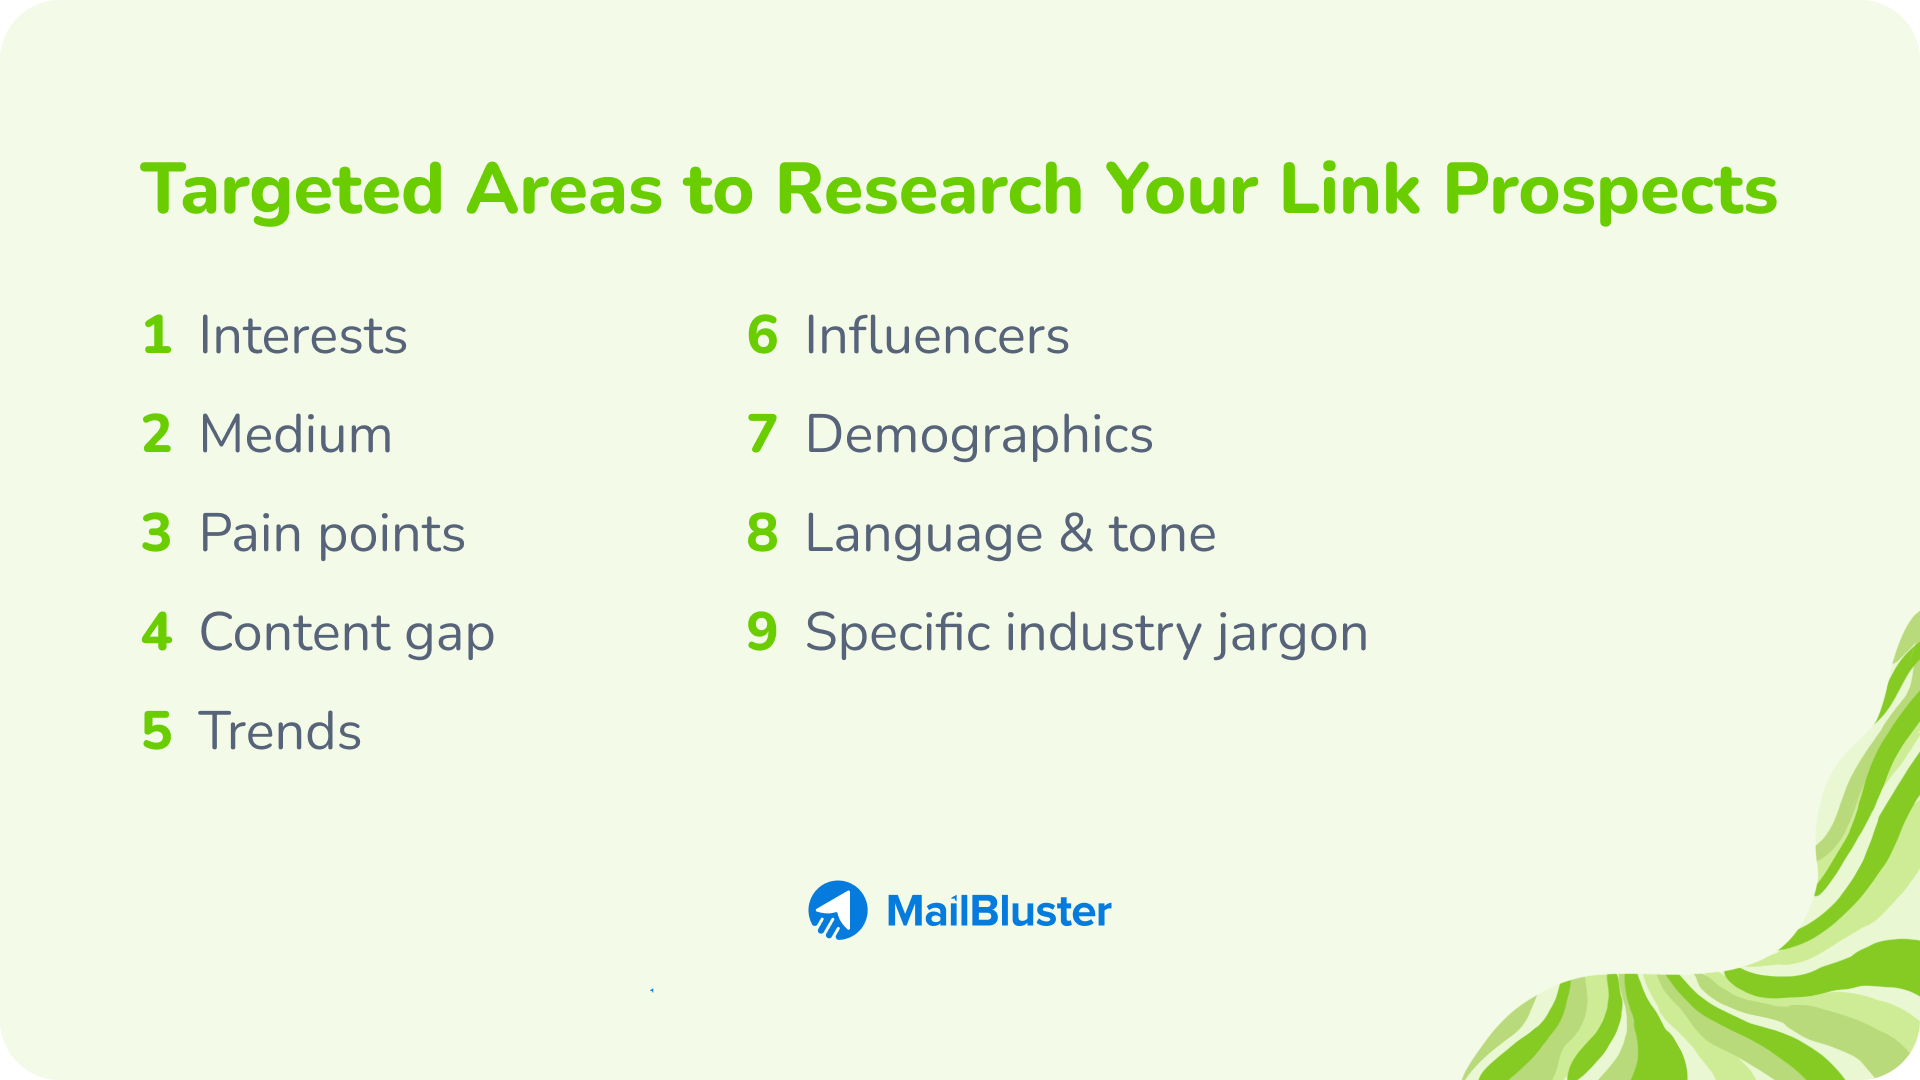 Targeted areas to research your link prospects for personalize your outreach marketing content